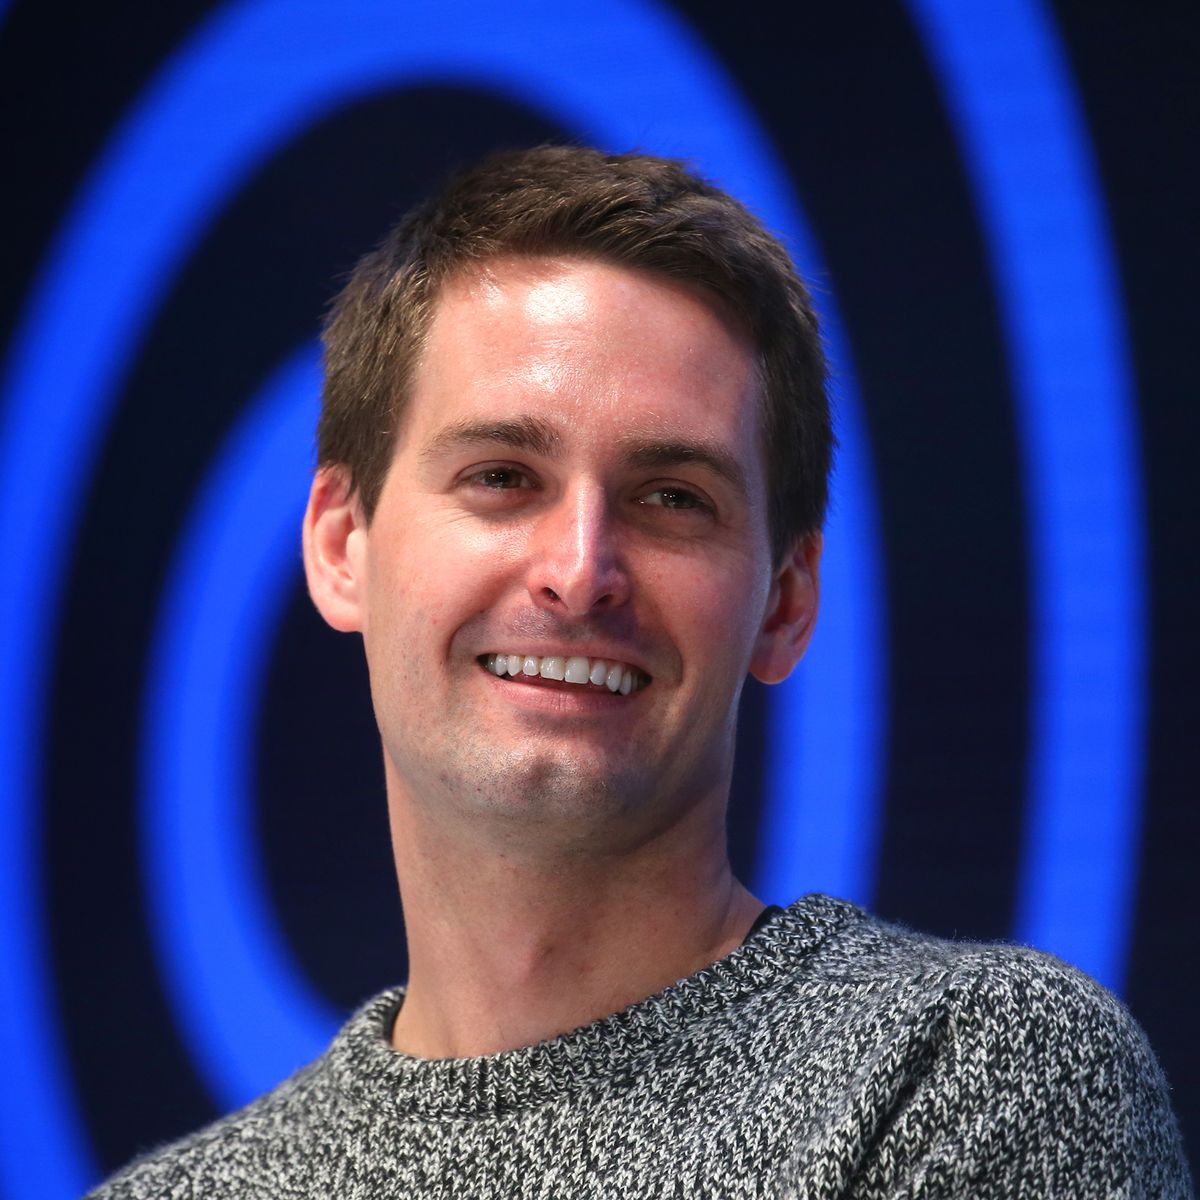 Evan Spiegel — Biography, Co-Founder and CEO Snapchat